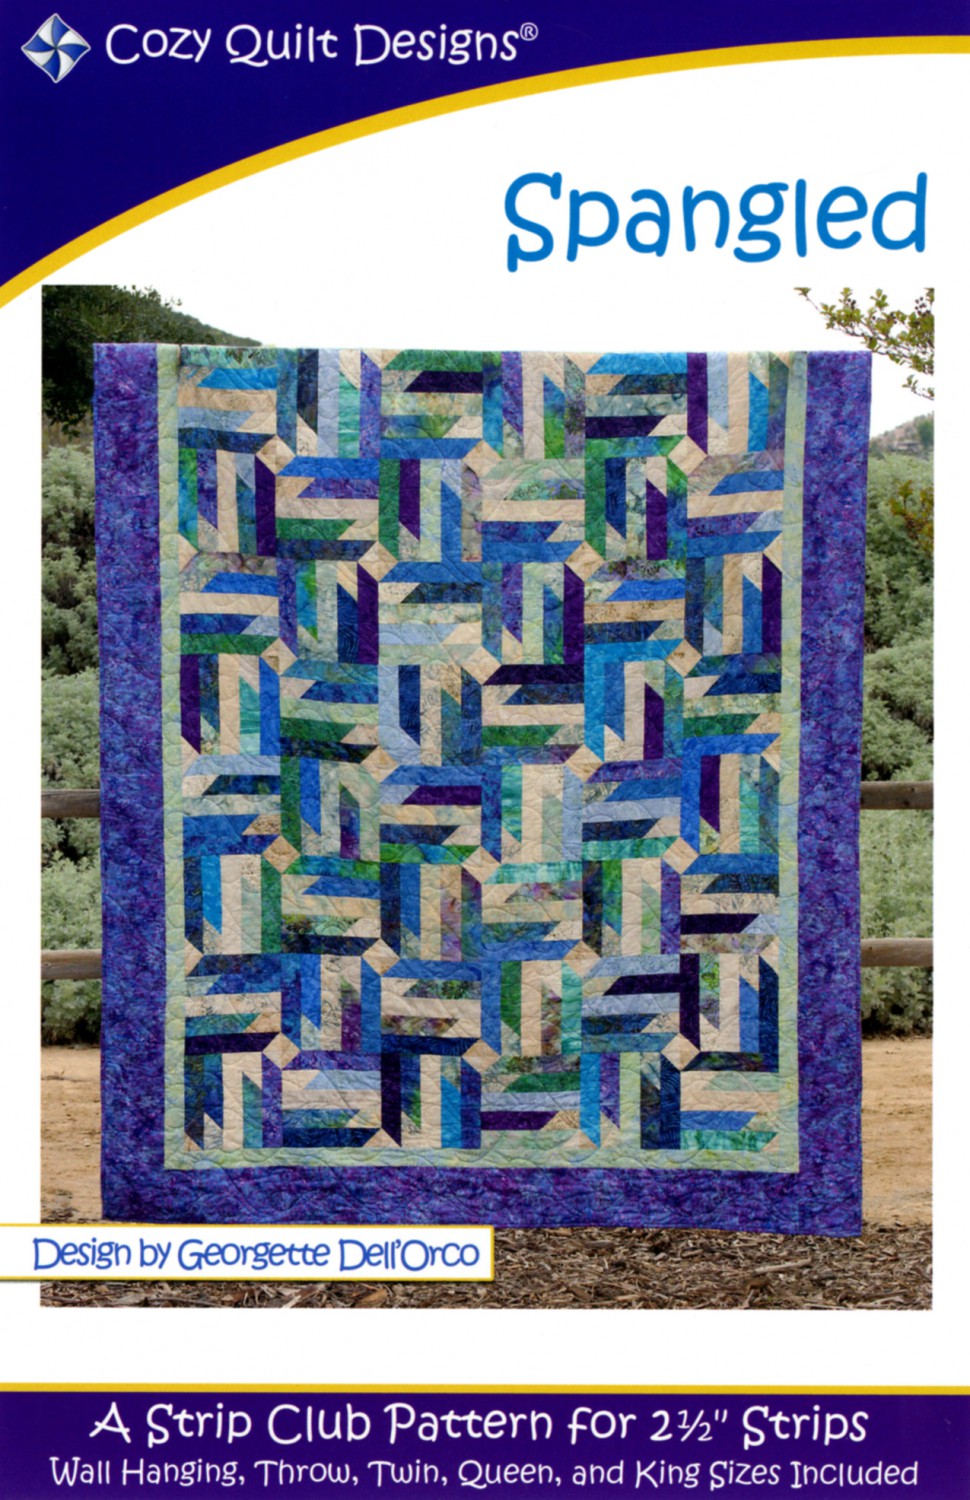 Cozy Quilt Designs Spangled Quilt Pattern